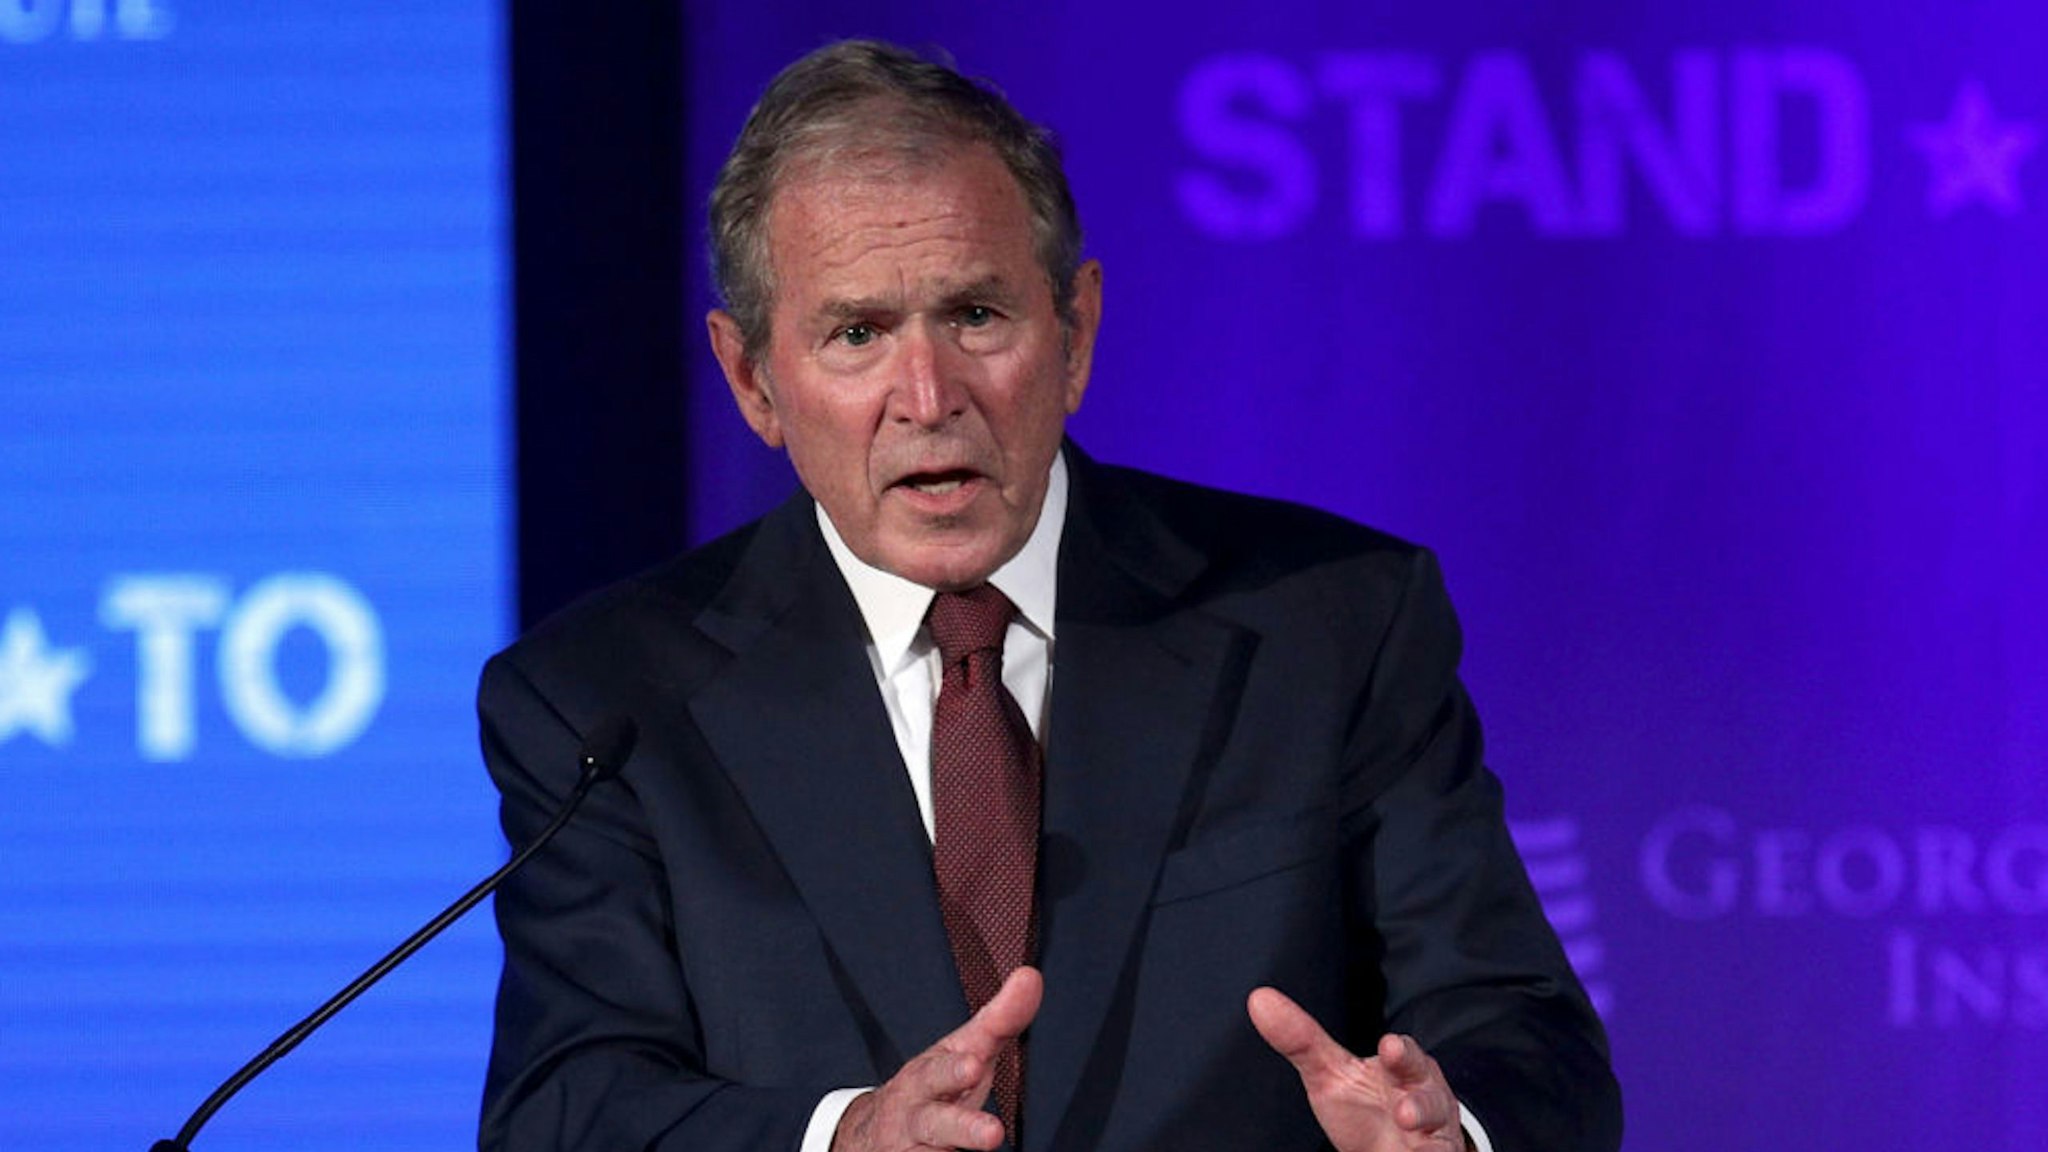 WASHINGTON, DC - JUNE 23: Former U.S. President George W. Bush speaks during a conference at the U.S. Chamber of Commerce June 23, 2017 in Washington, DC. The George W. Bush Institute hosted a conference to address veteran issues